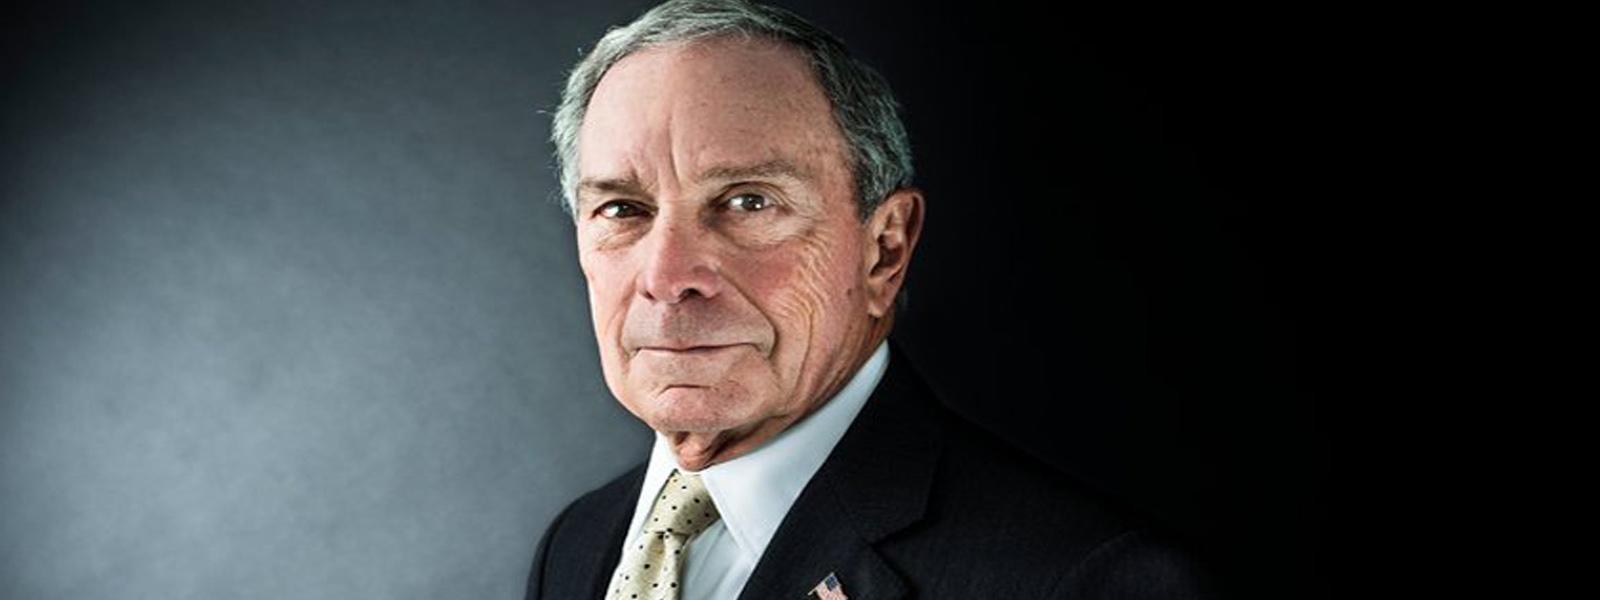 Bloomberg pledges $4.5m for Paris climate accord